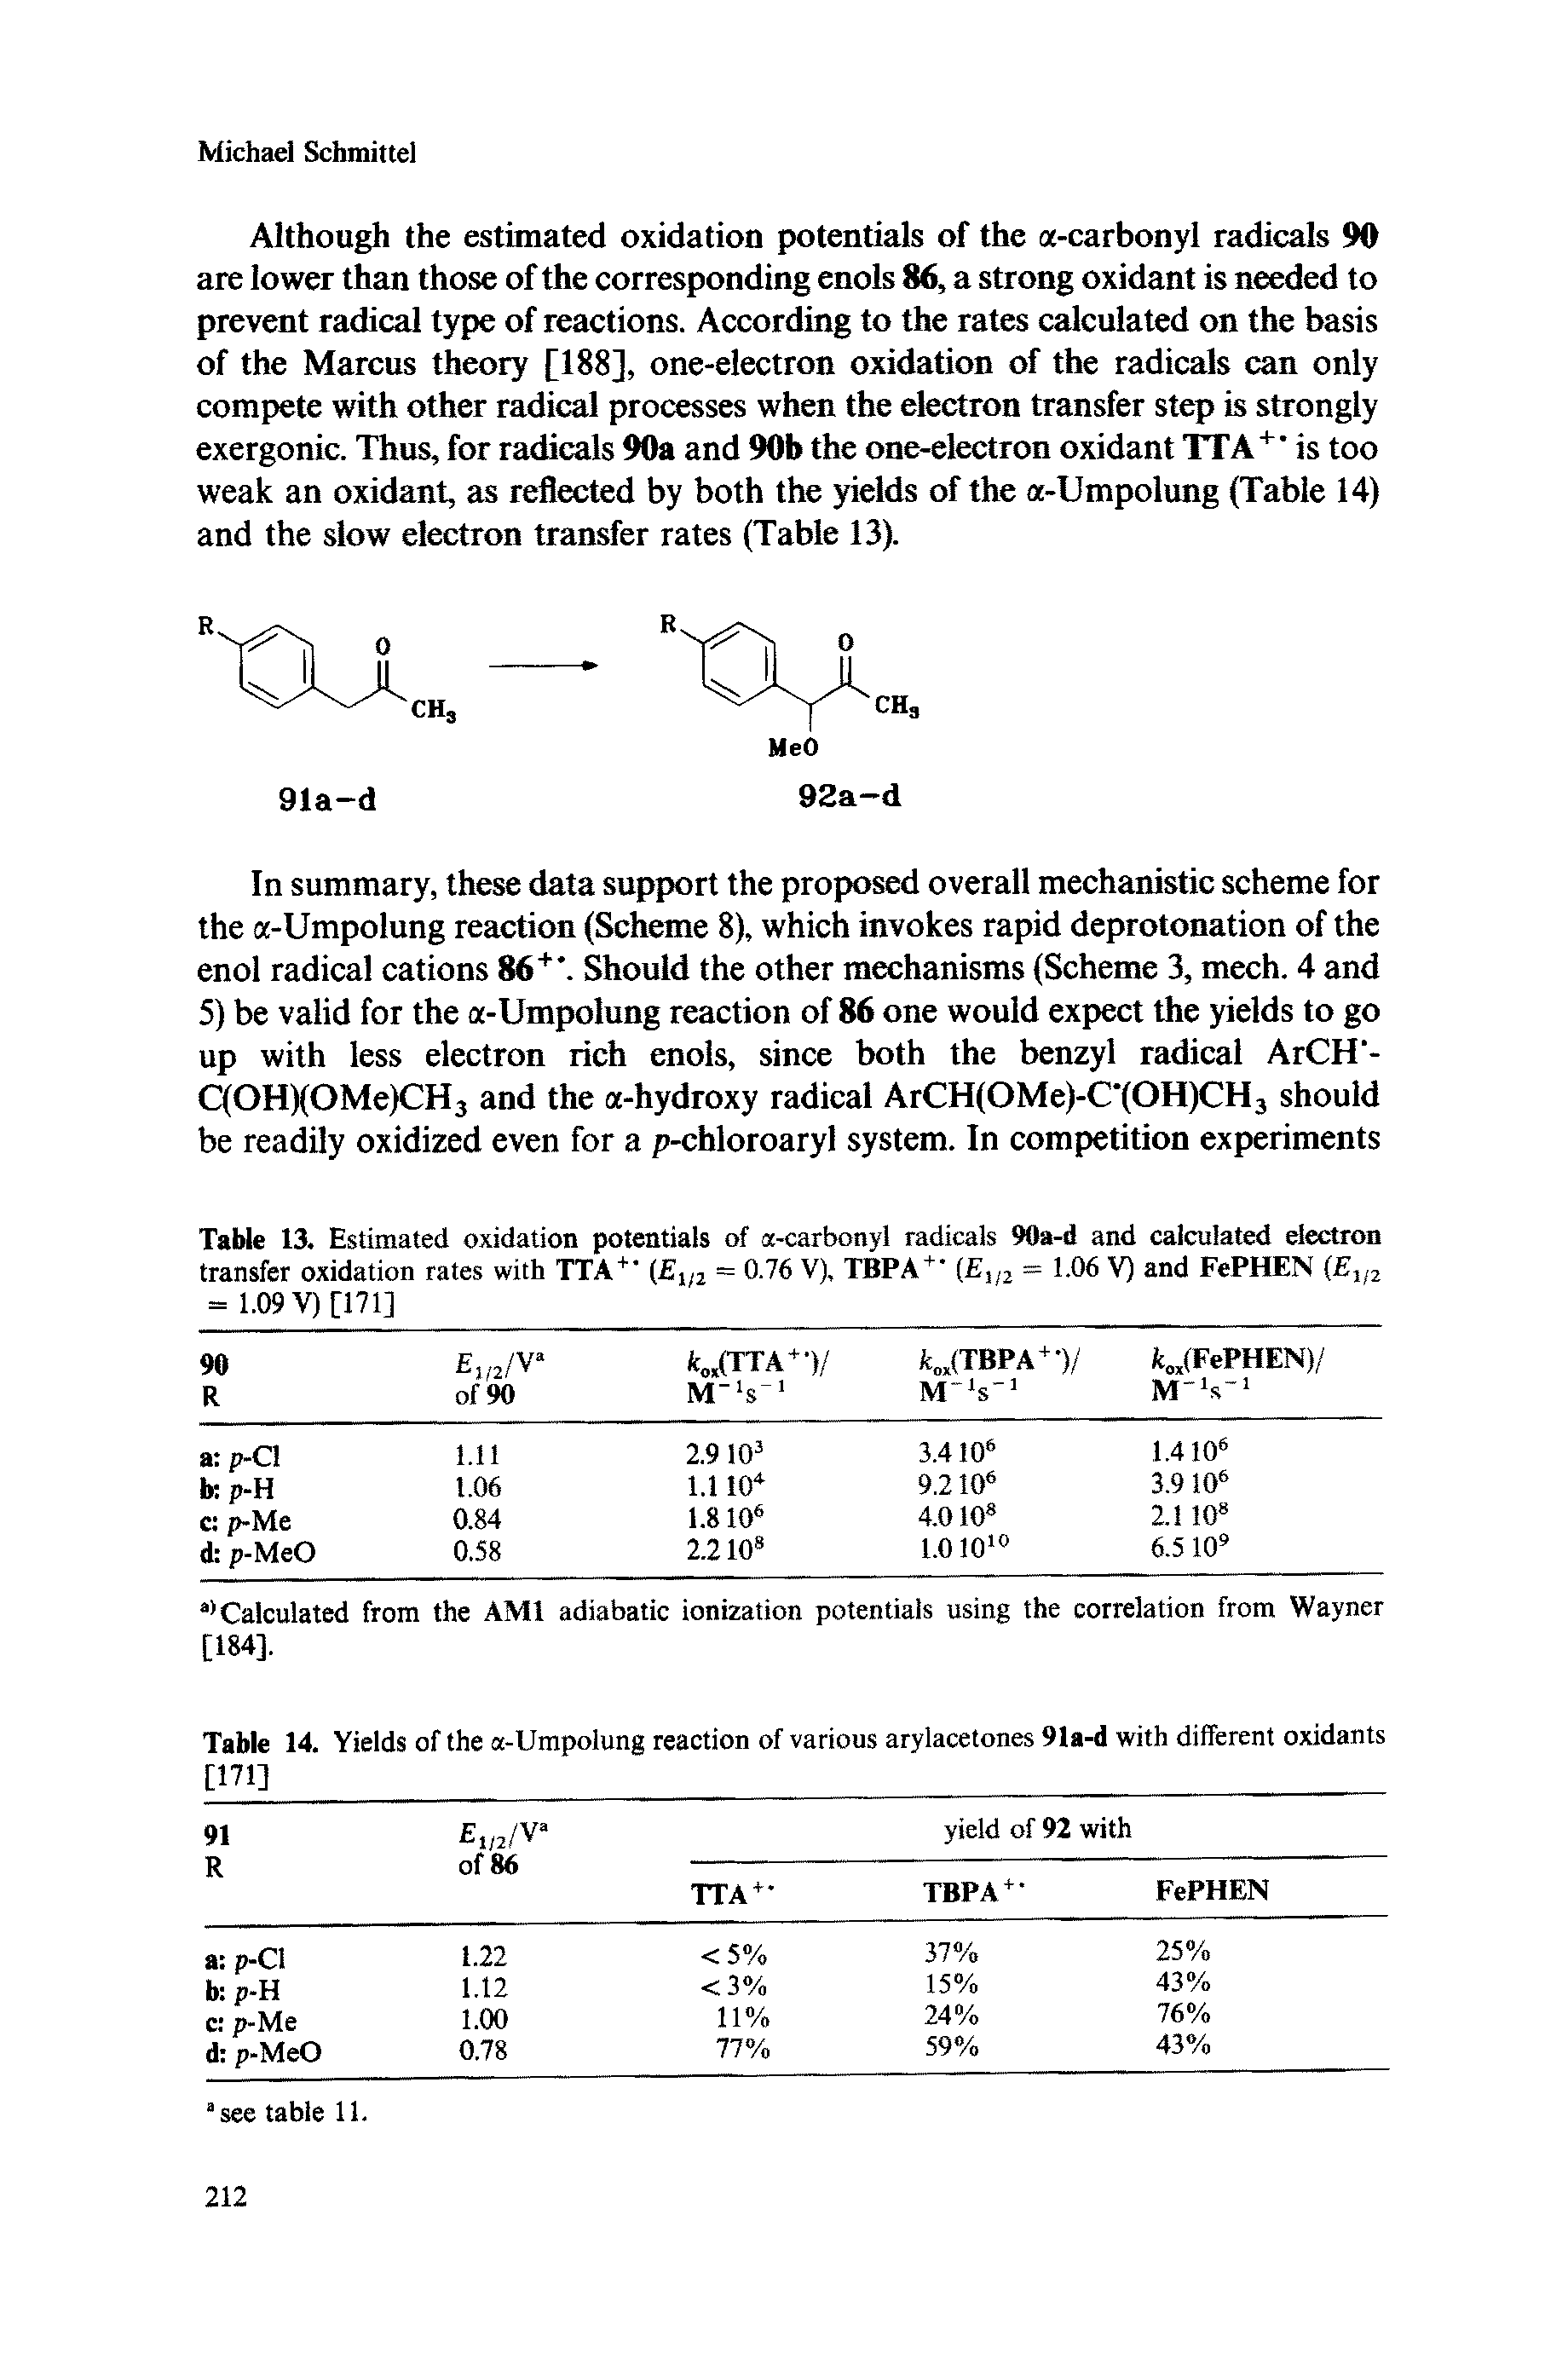 Table 13. Estimated oxidation potentials of a-carbonyl radicals 90a-d and calculated electron transfer oxidation rates with TTA + ( , 2 = 0.76 V), TBPA + ( ,2 = 1-06 V) and FcPHEN ( 2 = 1.09 V) [171]...